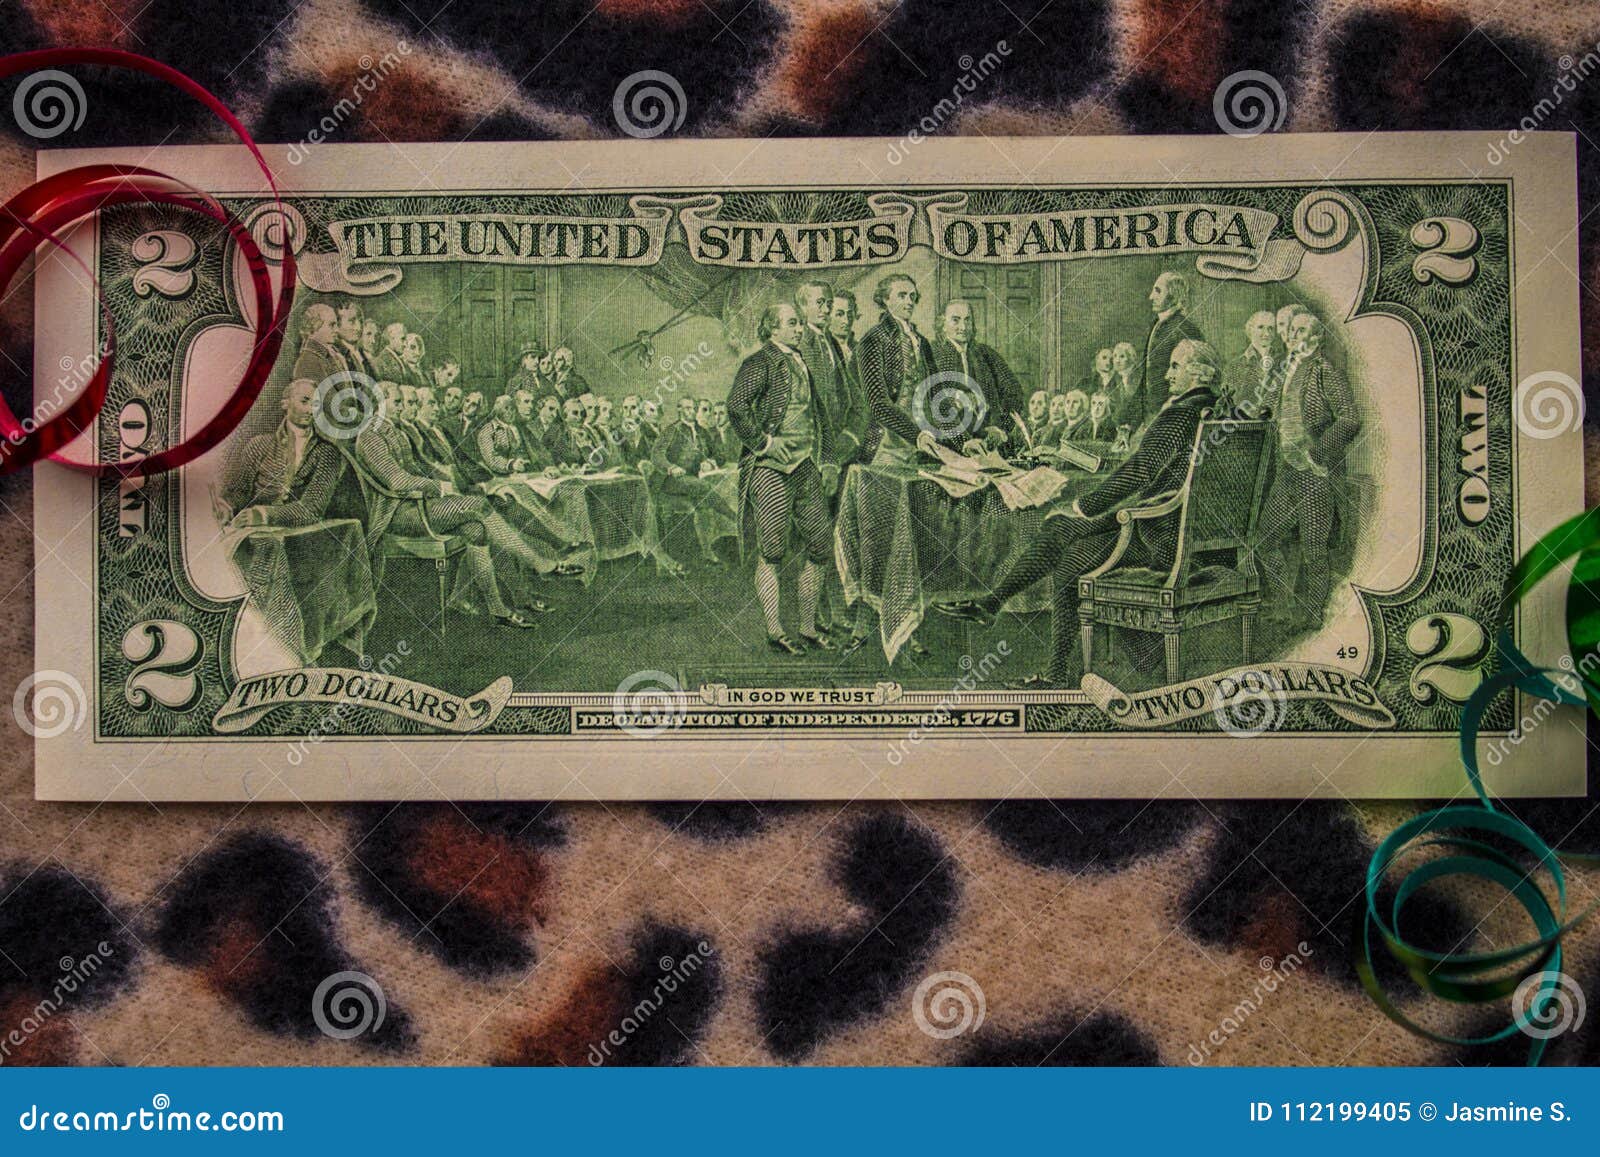 2-Sided * $5 Bill w/COA Declaration of Independence Official Legal Tender U.S 